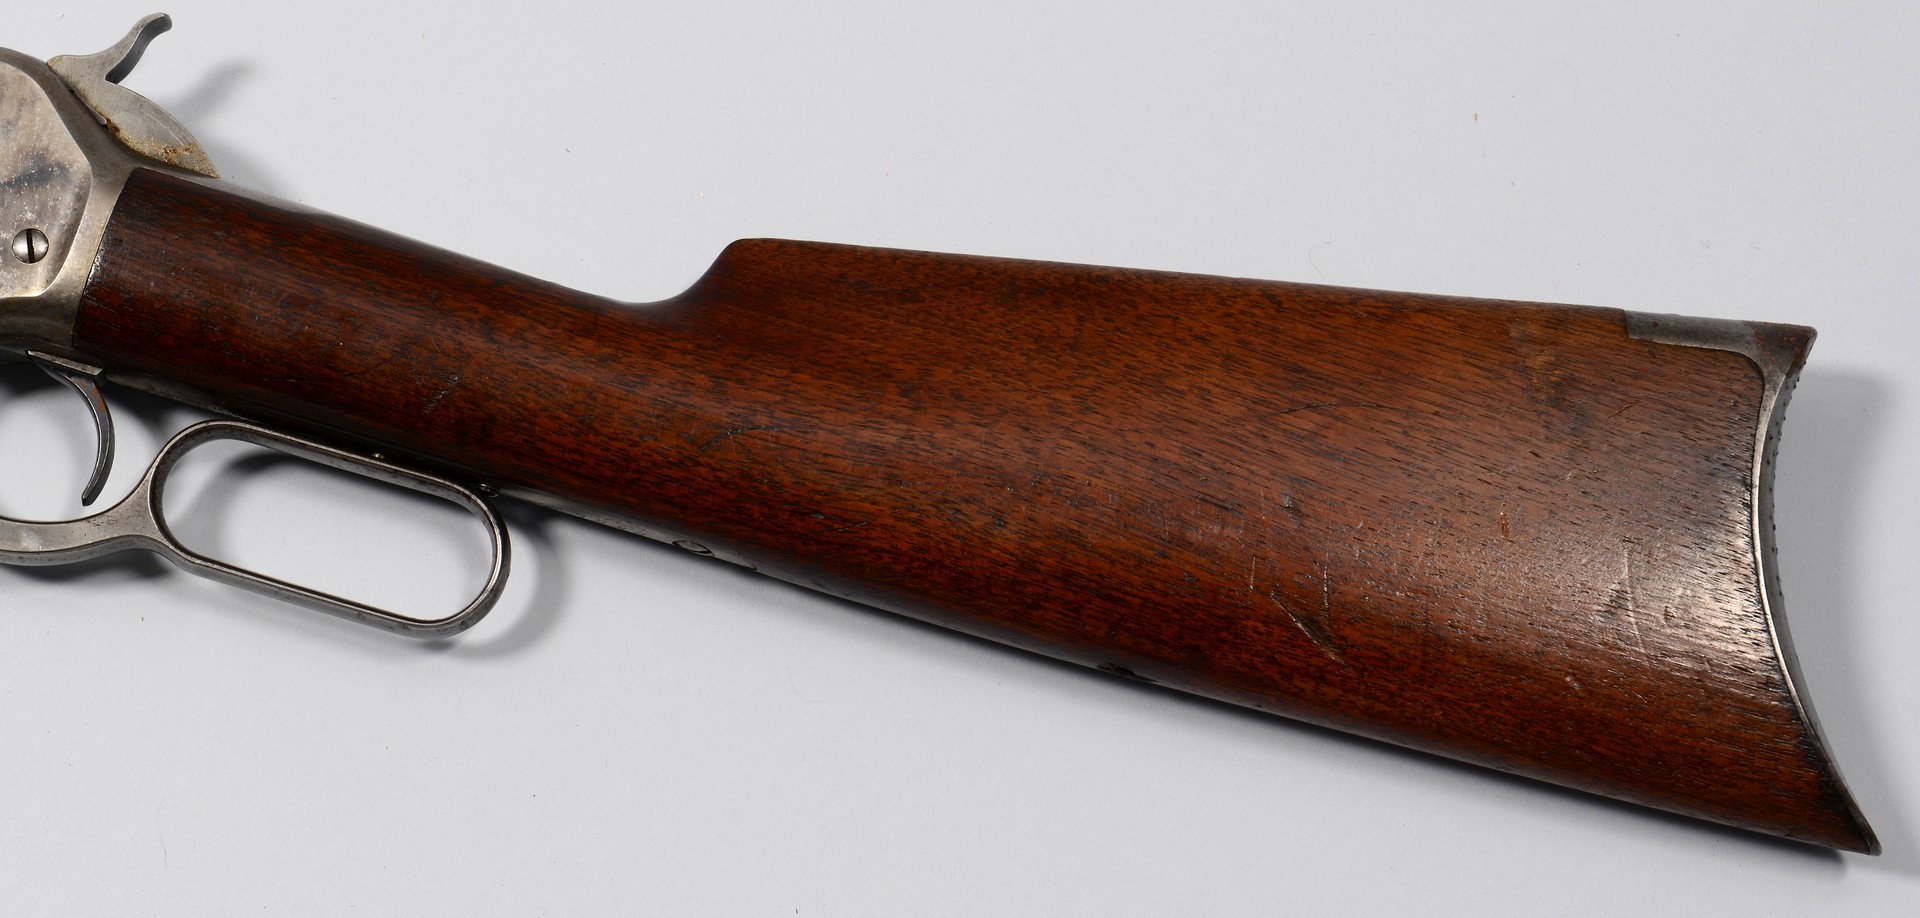 Lot 575: Winchester Lever Action 86